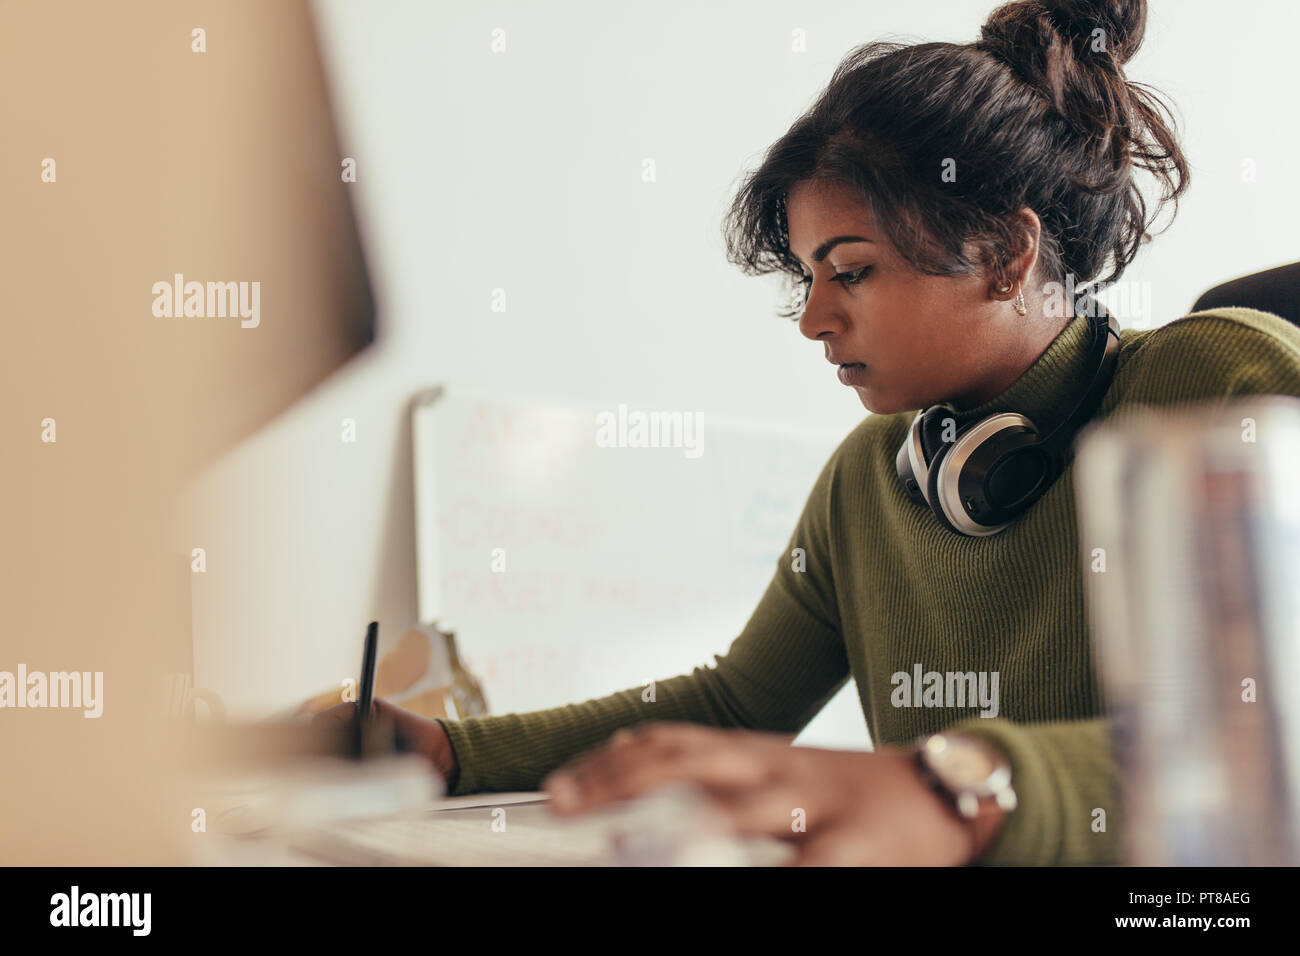 Woman making notes while working on computer. Female computer programmer working at her desk. Stock Photo